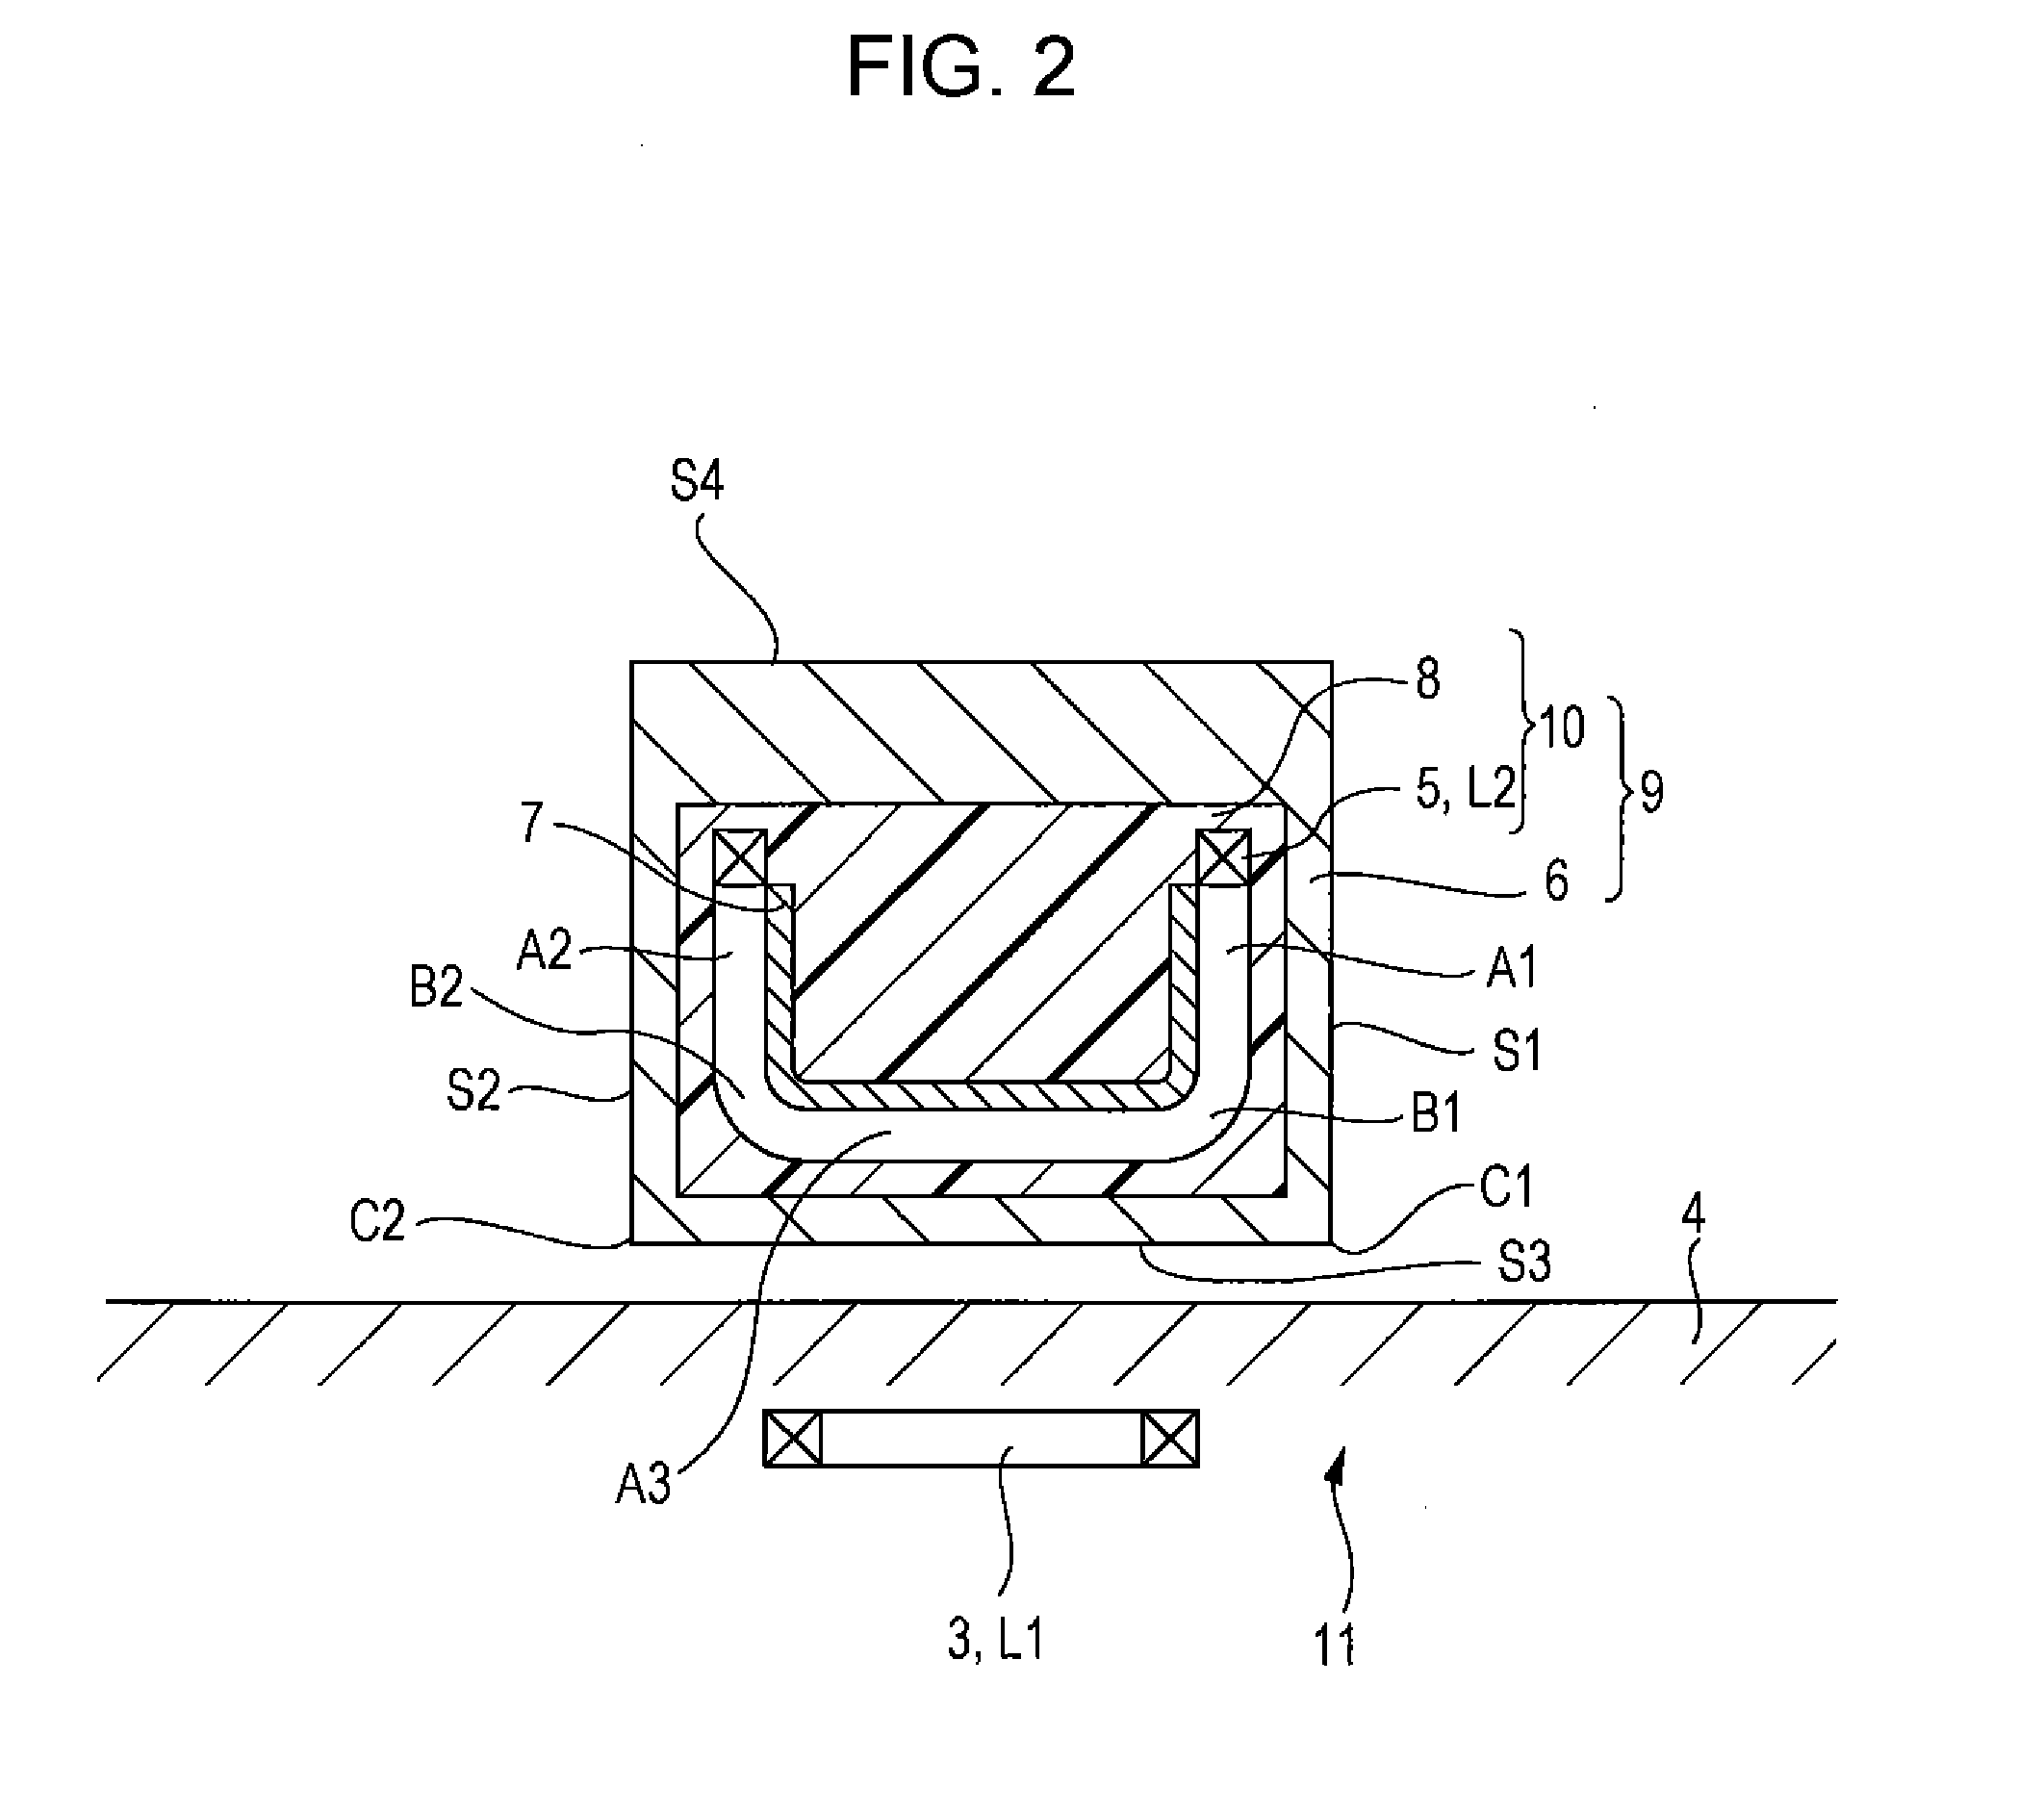 Power feeding device, power receiving device, and wireless power transmission device